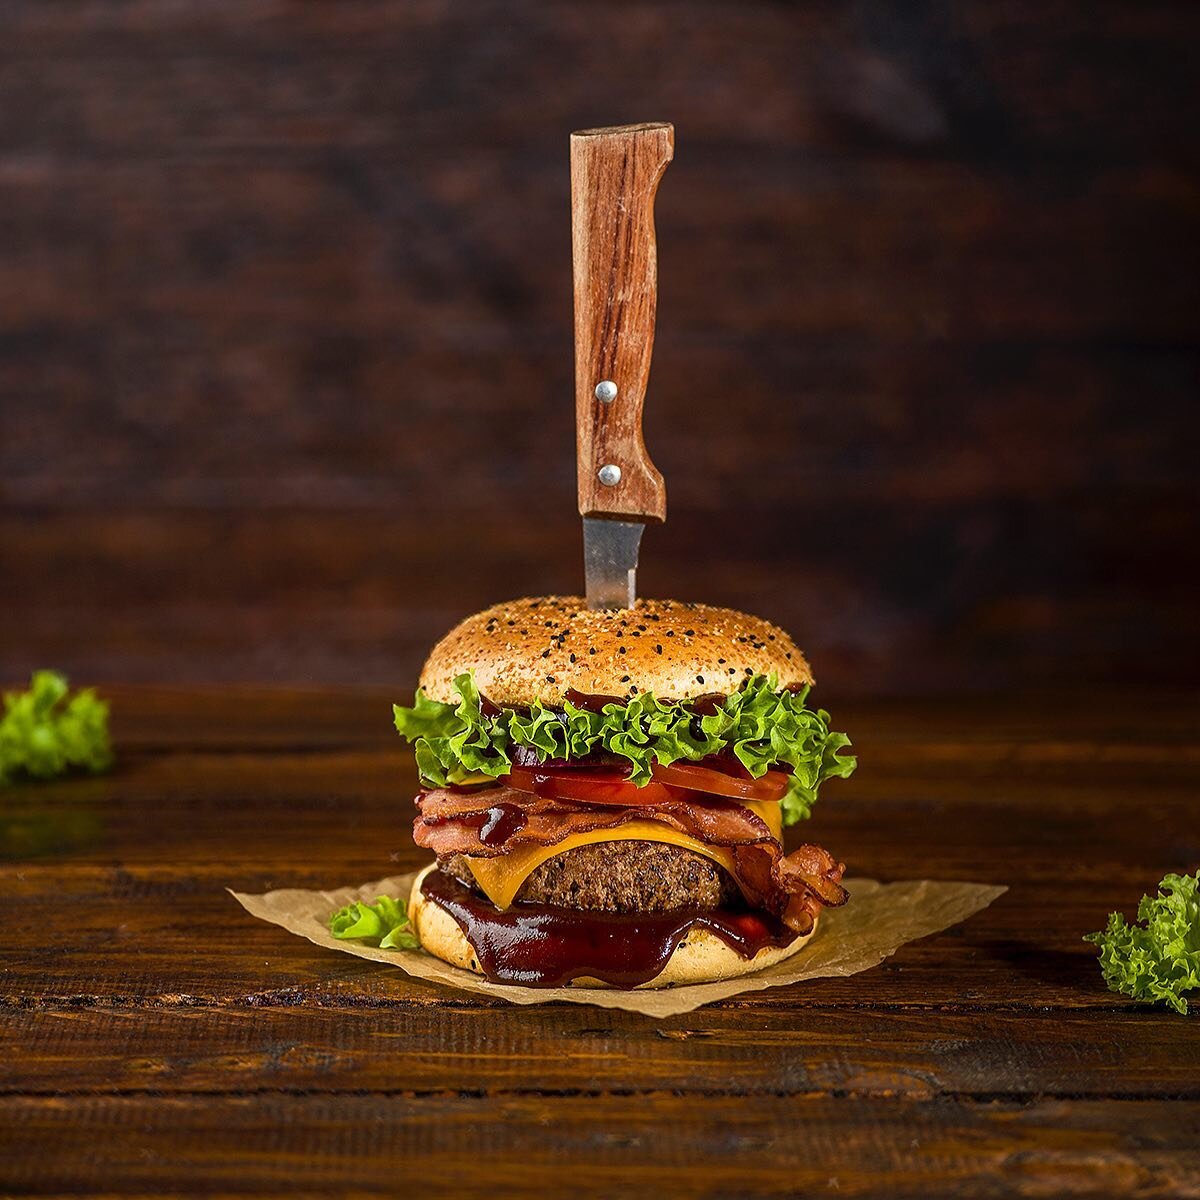 New work for anda sauces - burger styling and photography - hope it makes you hungry? 
#foodporn #burgers #burgerlovers #foodphotography #foodphotographer #hasselblad #hasselbladx1d #mediumformatmag #foodstylist #foodstyling